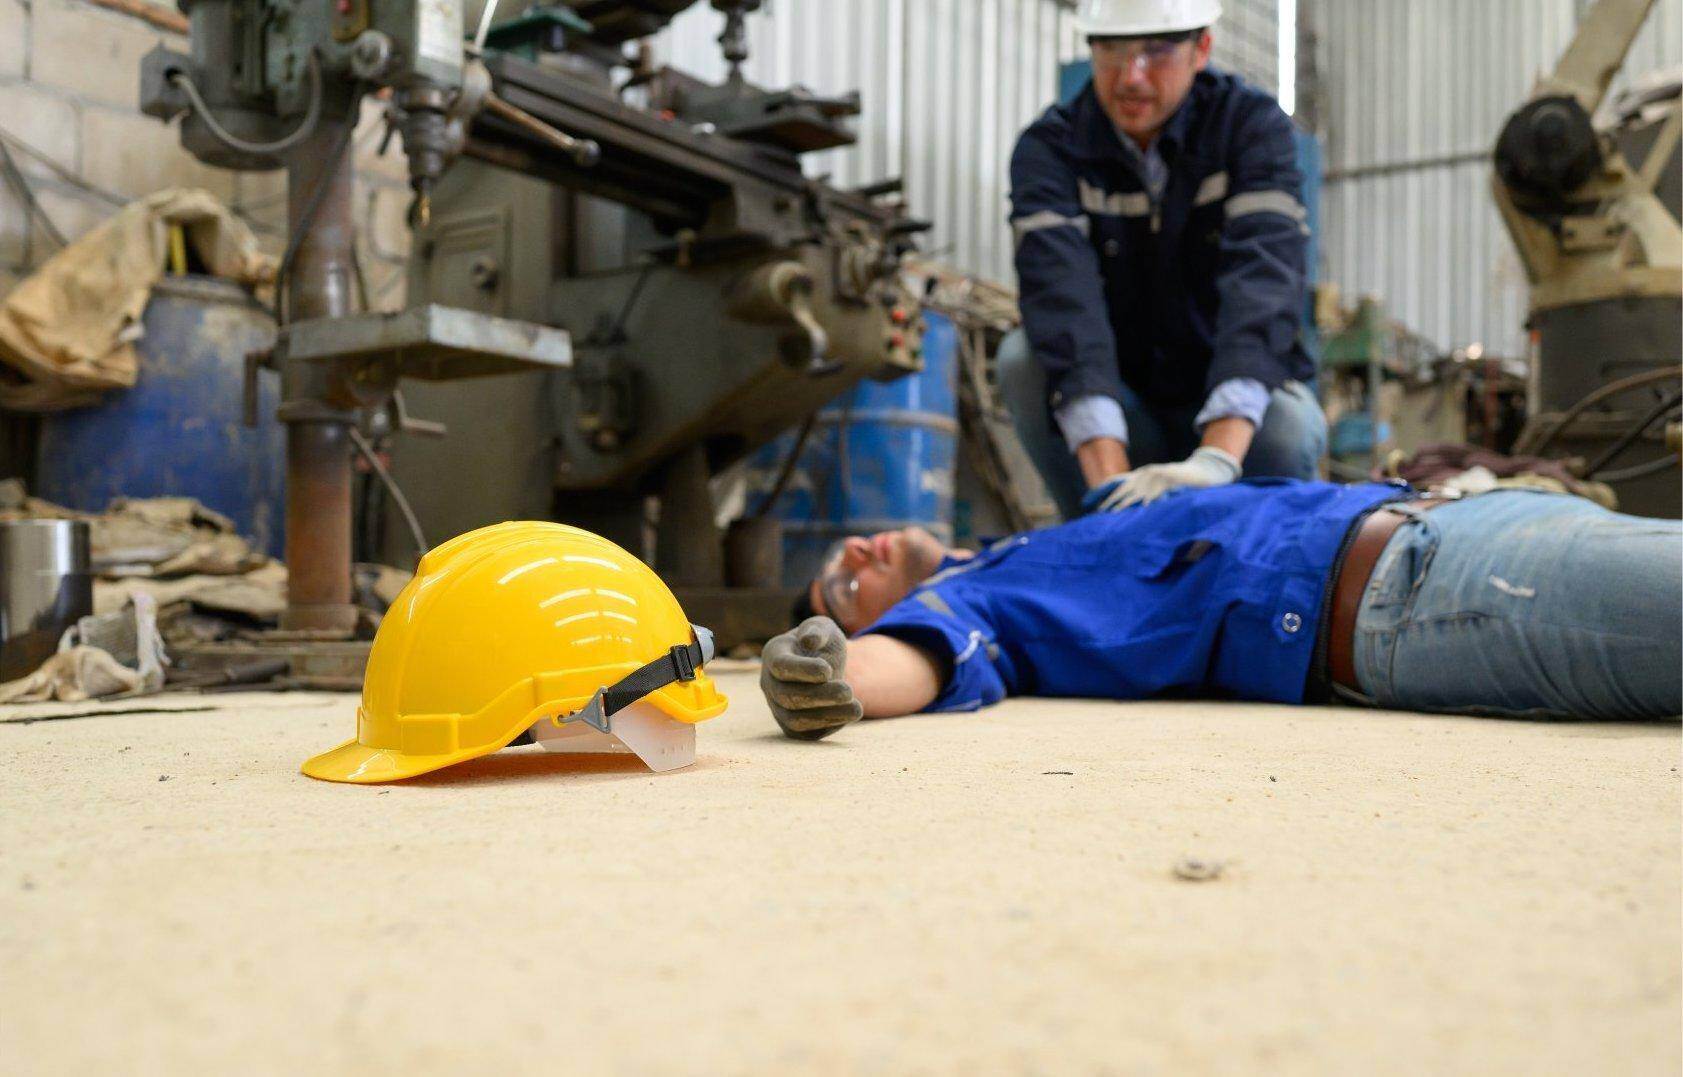 An unconscious man who has been injured on the job who will file for workers compensation in Buford, Georgia